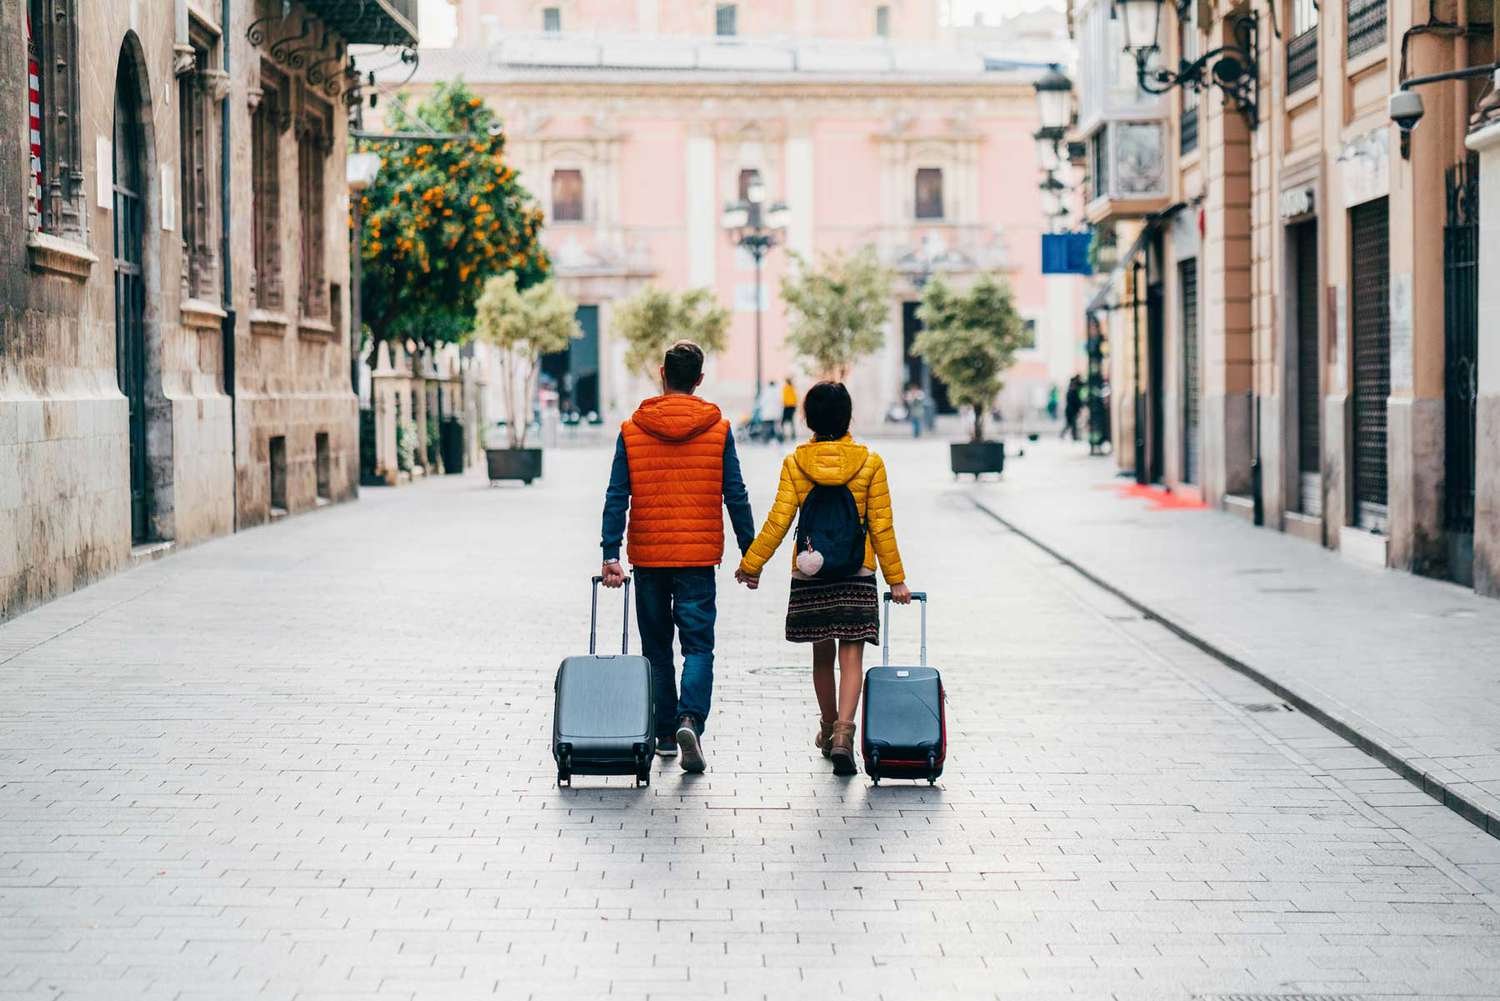 9 Mistakes That Could Ruin Your Romantic Couples' Trip